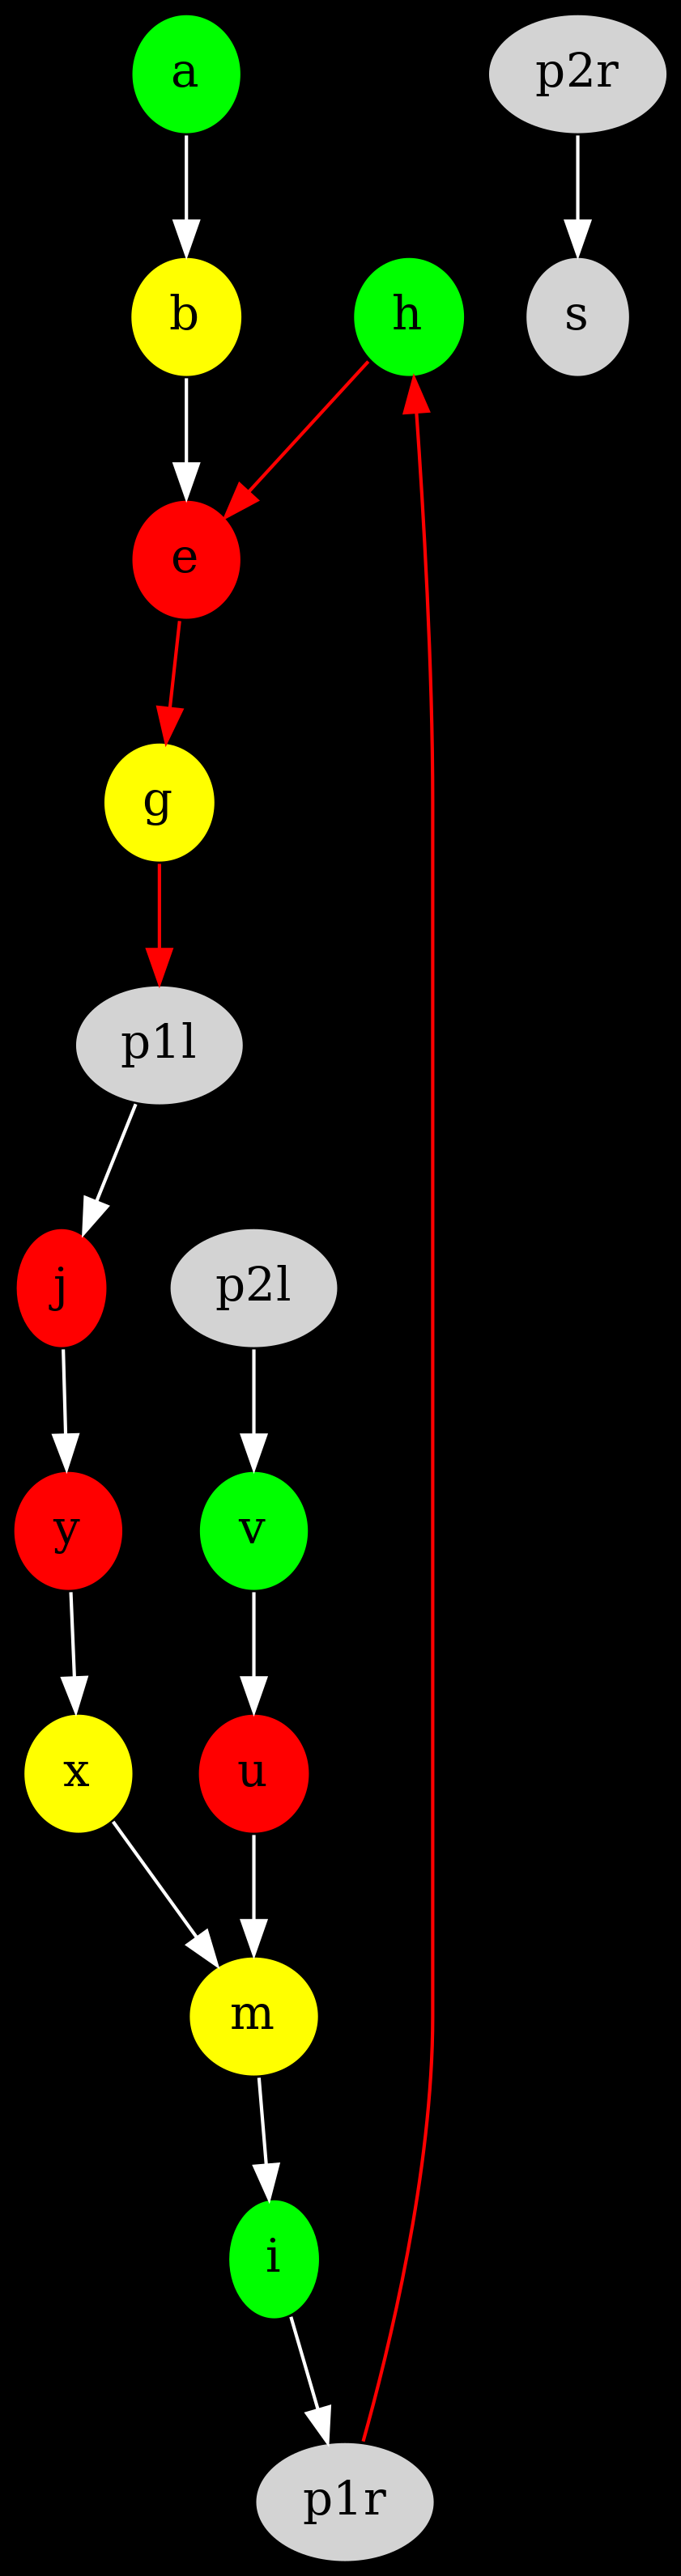 expanded graph for configuration 211